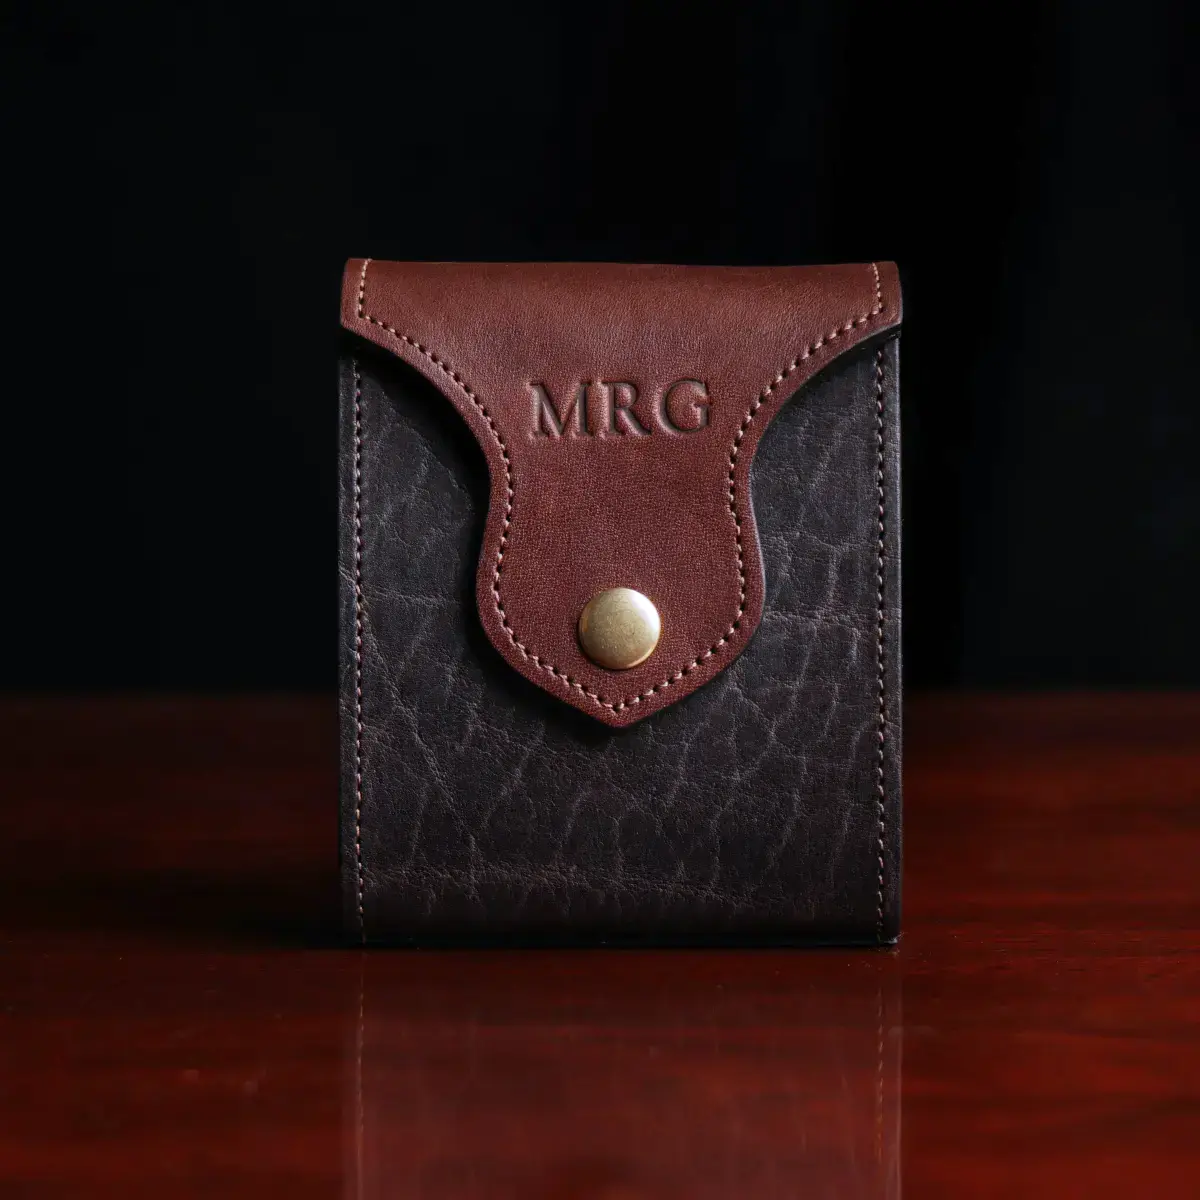 Leather playing card case, hold one deck of playing cards. showing the front view